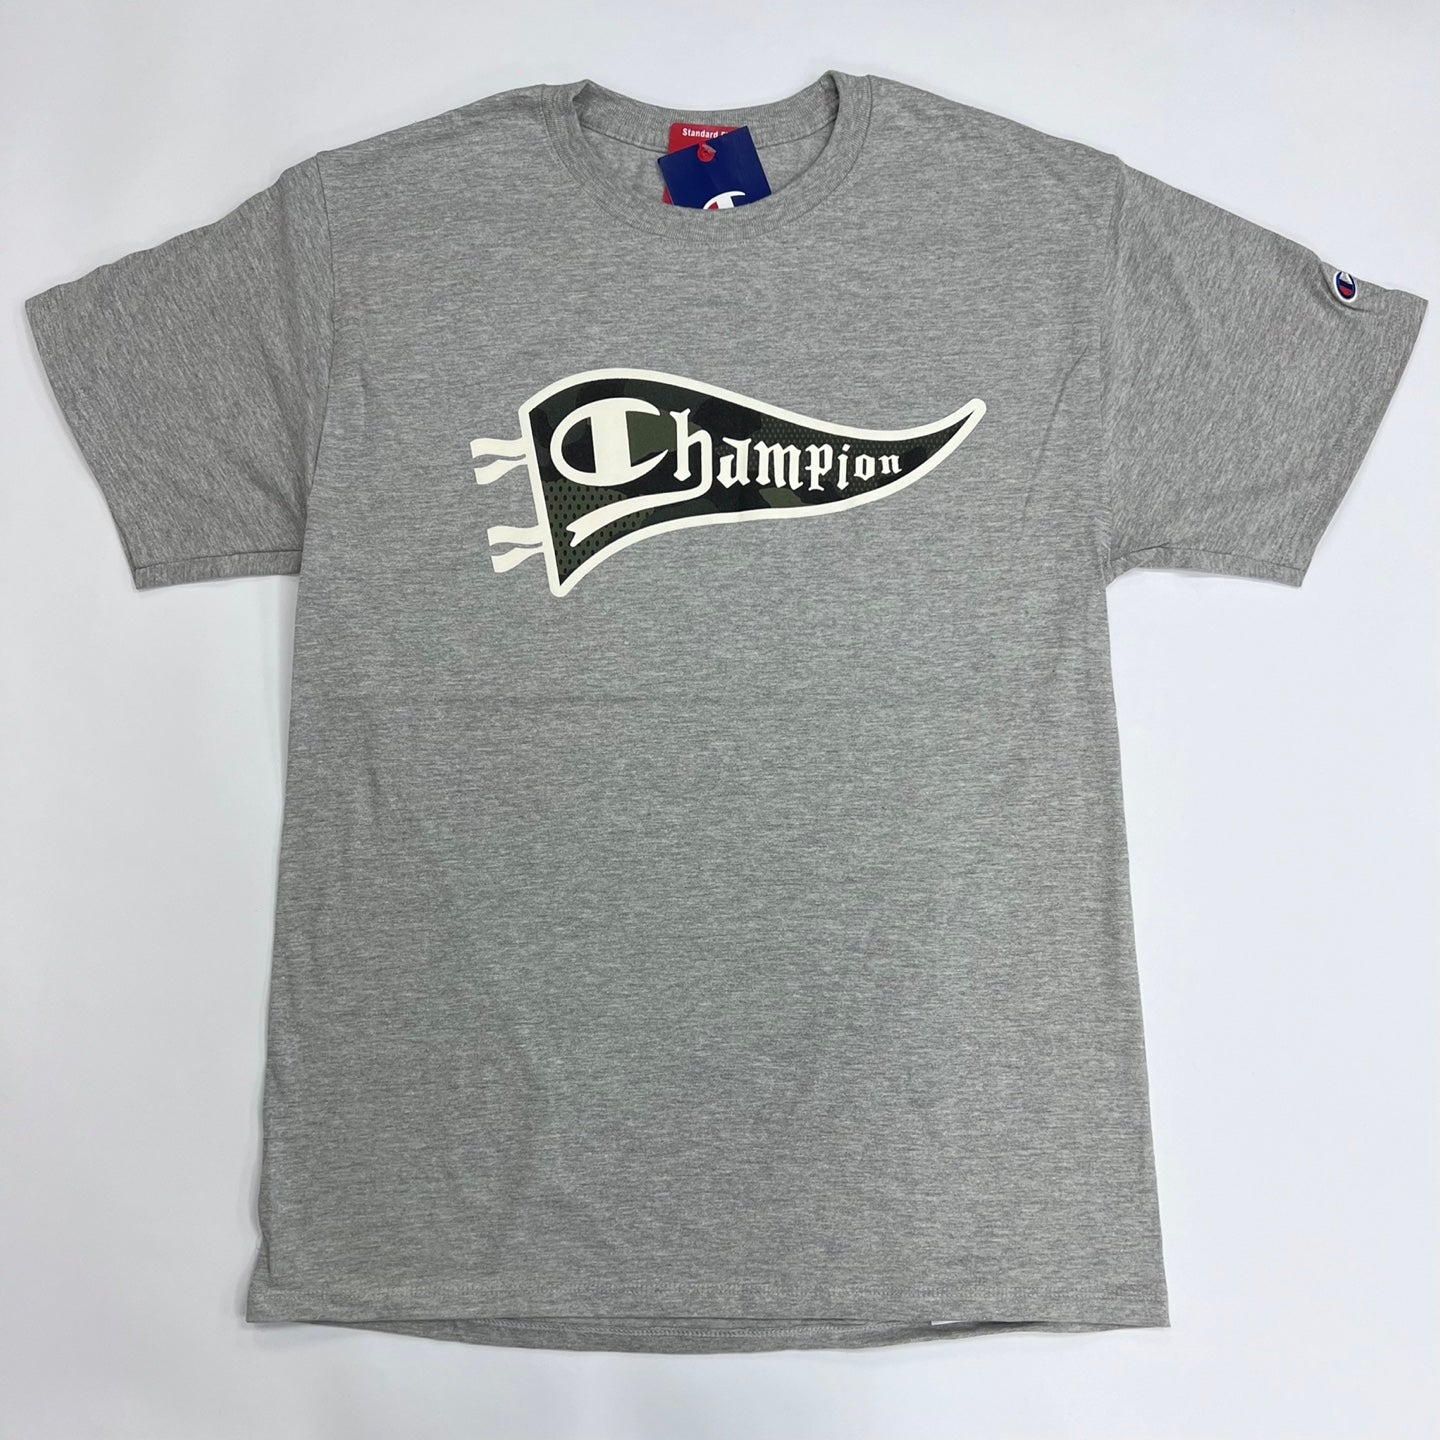 Classic K Graphic MOMO Patchwork – Pennant Champion Tee,